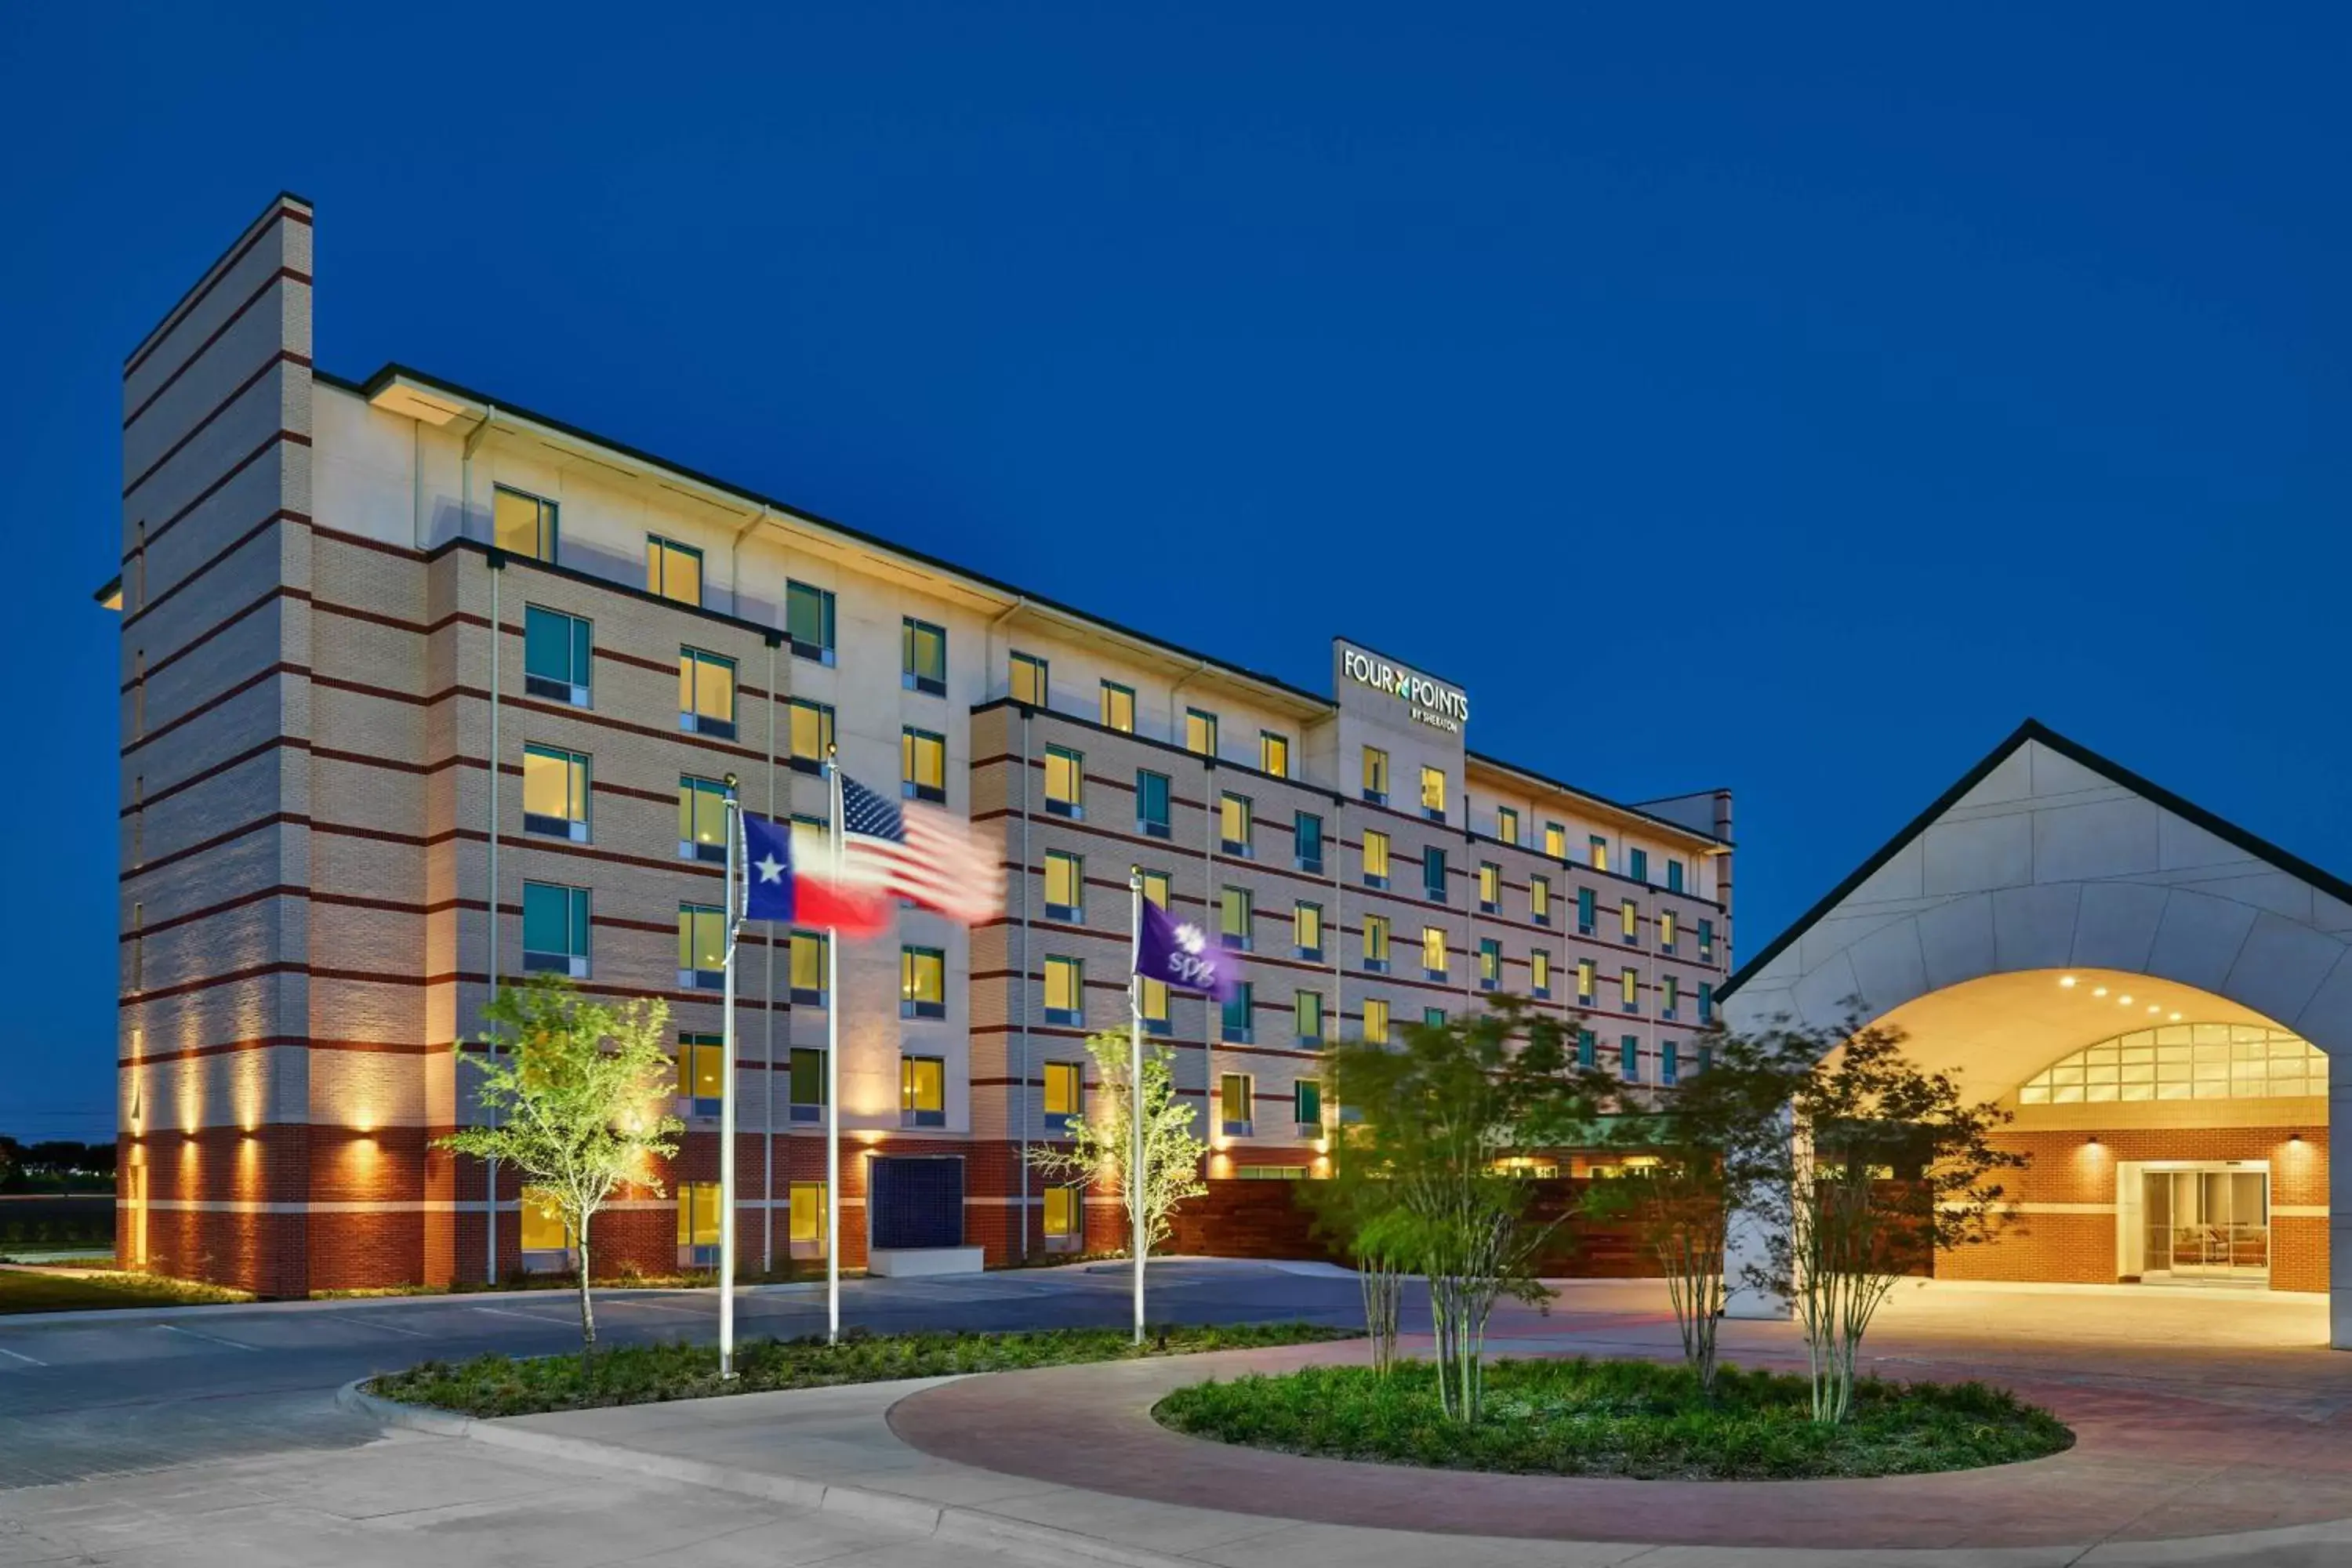 Property Building in Four Points by Sheraton Dallas Fort Worth Airport North